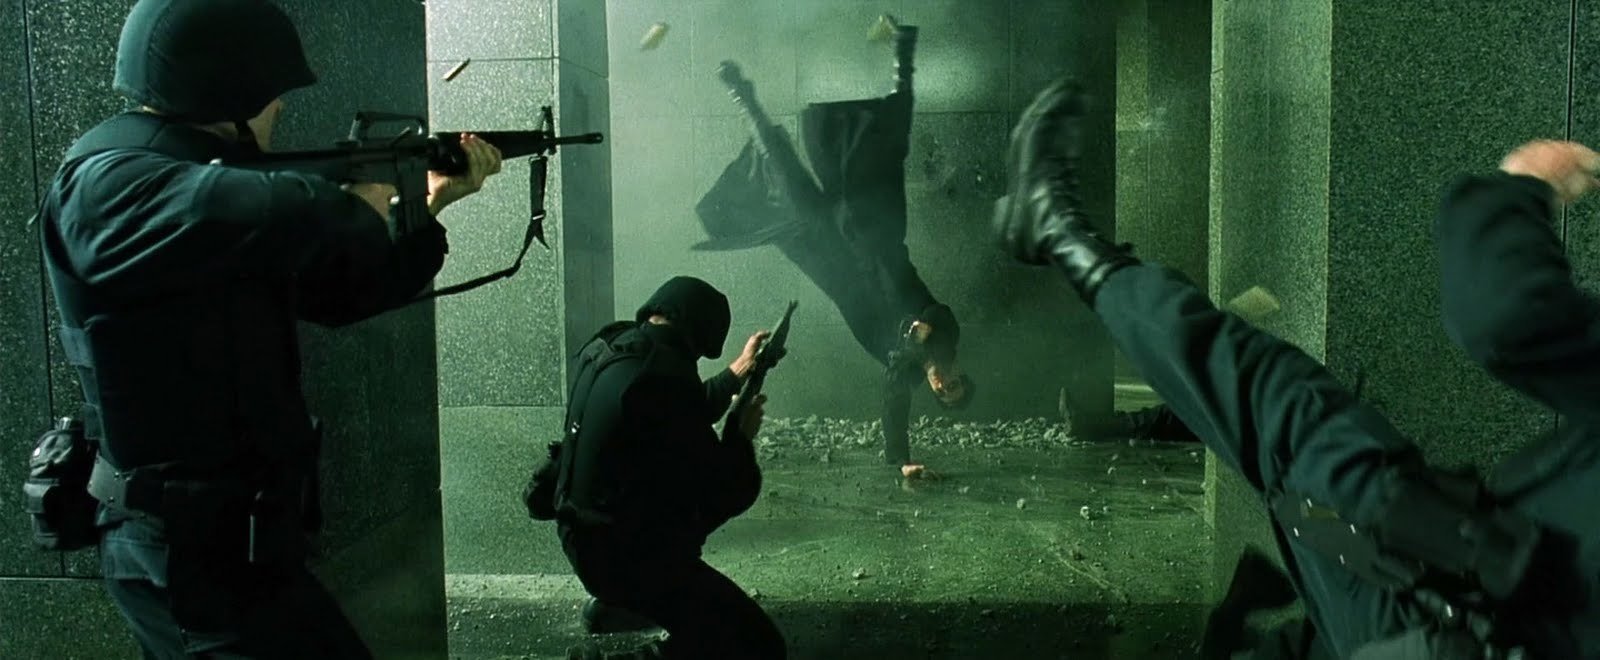 Still from the 1999 film The Matrix in which Neo and Trinity attack the building where Morpheus is being held. Here the idiotic gunplay has begun.